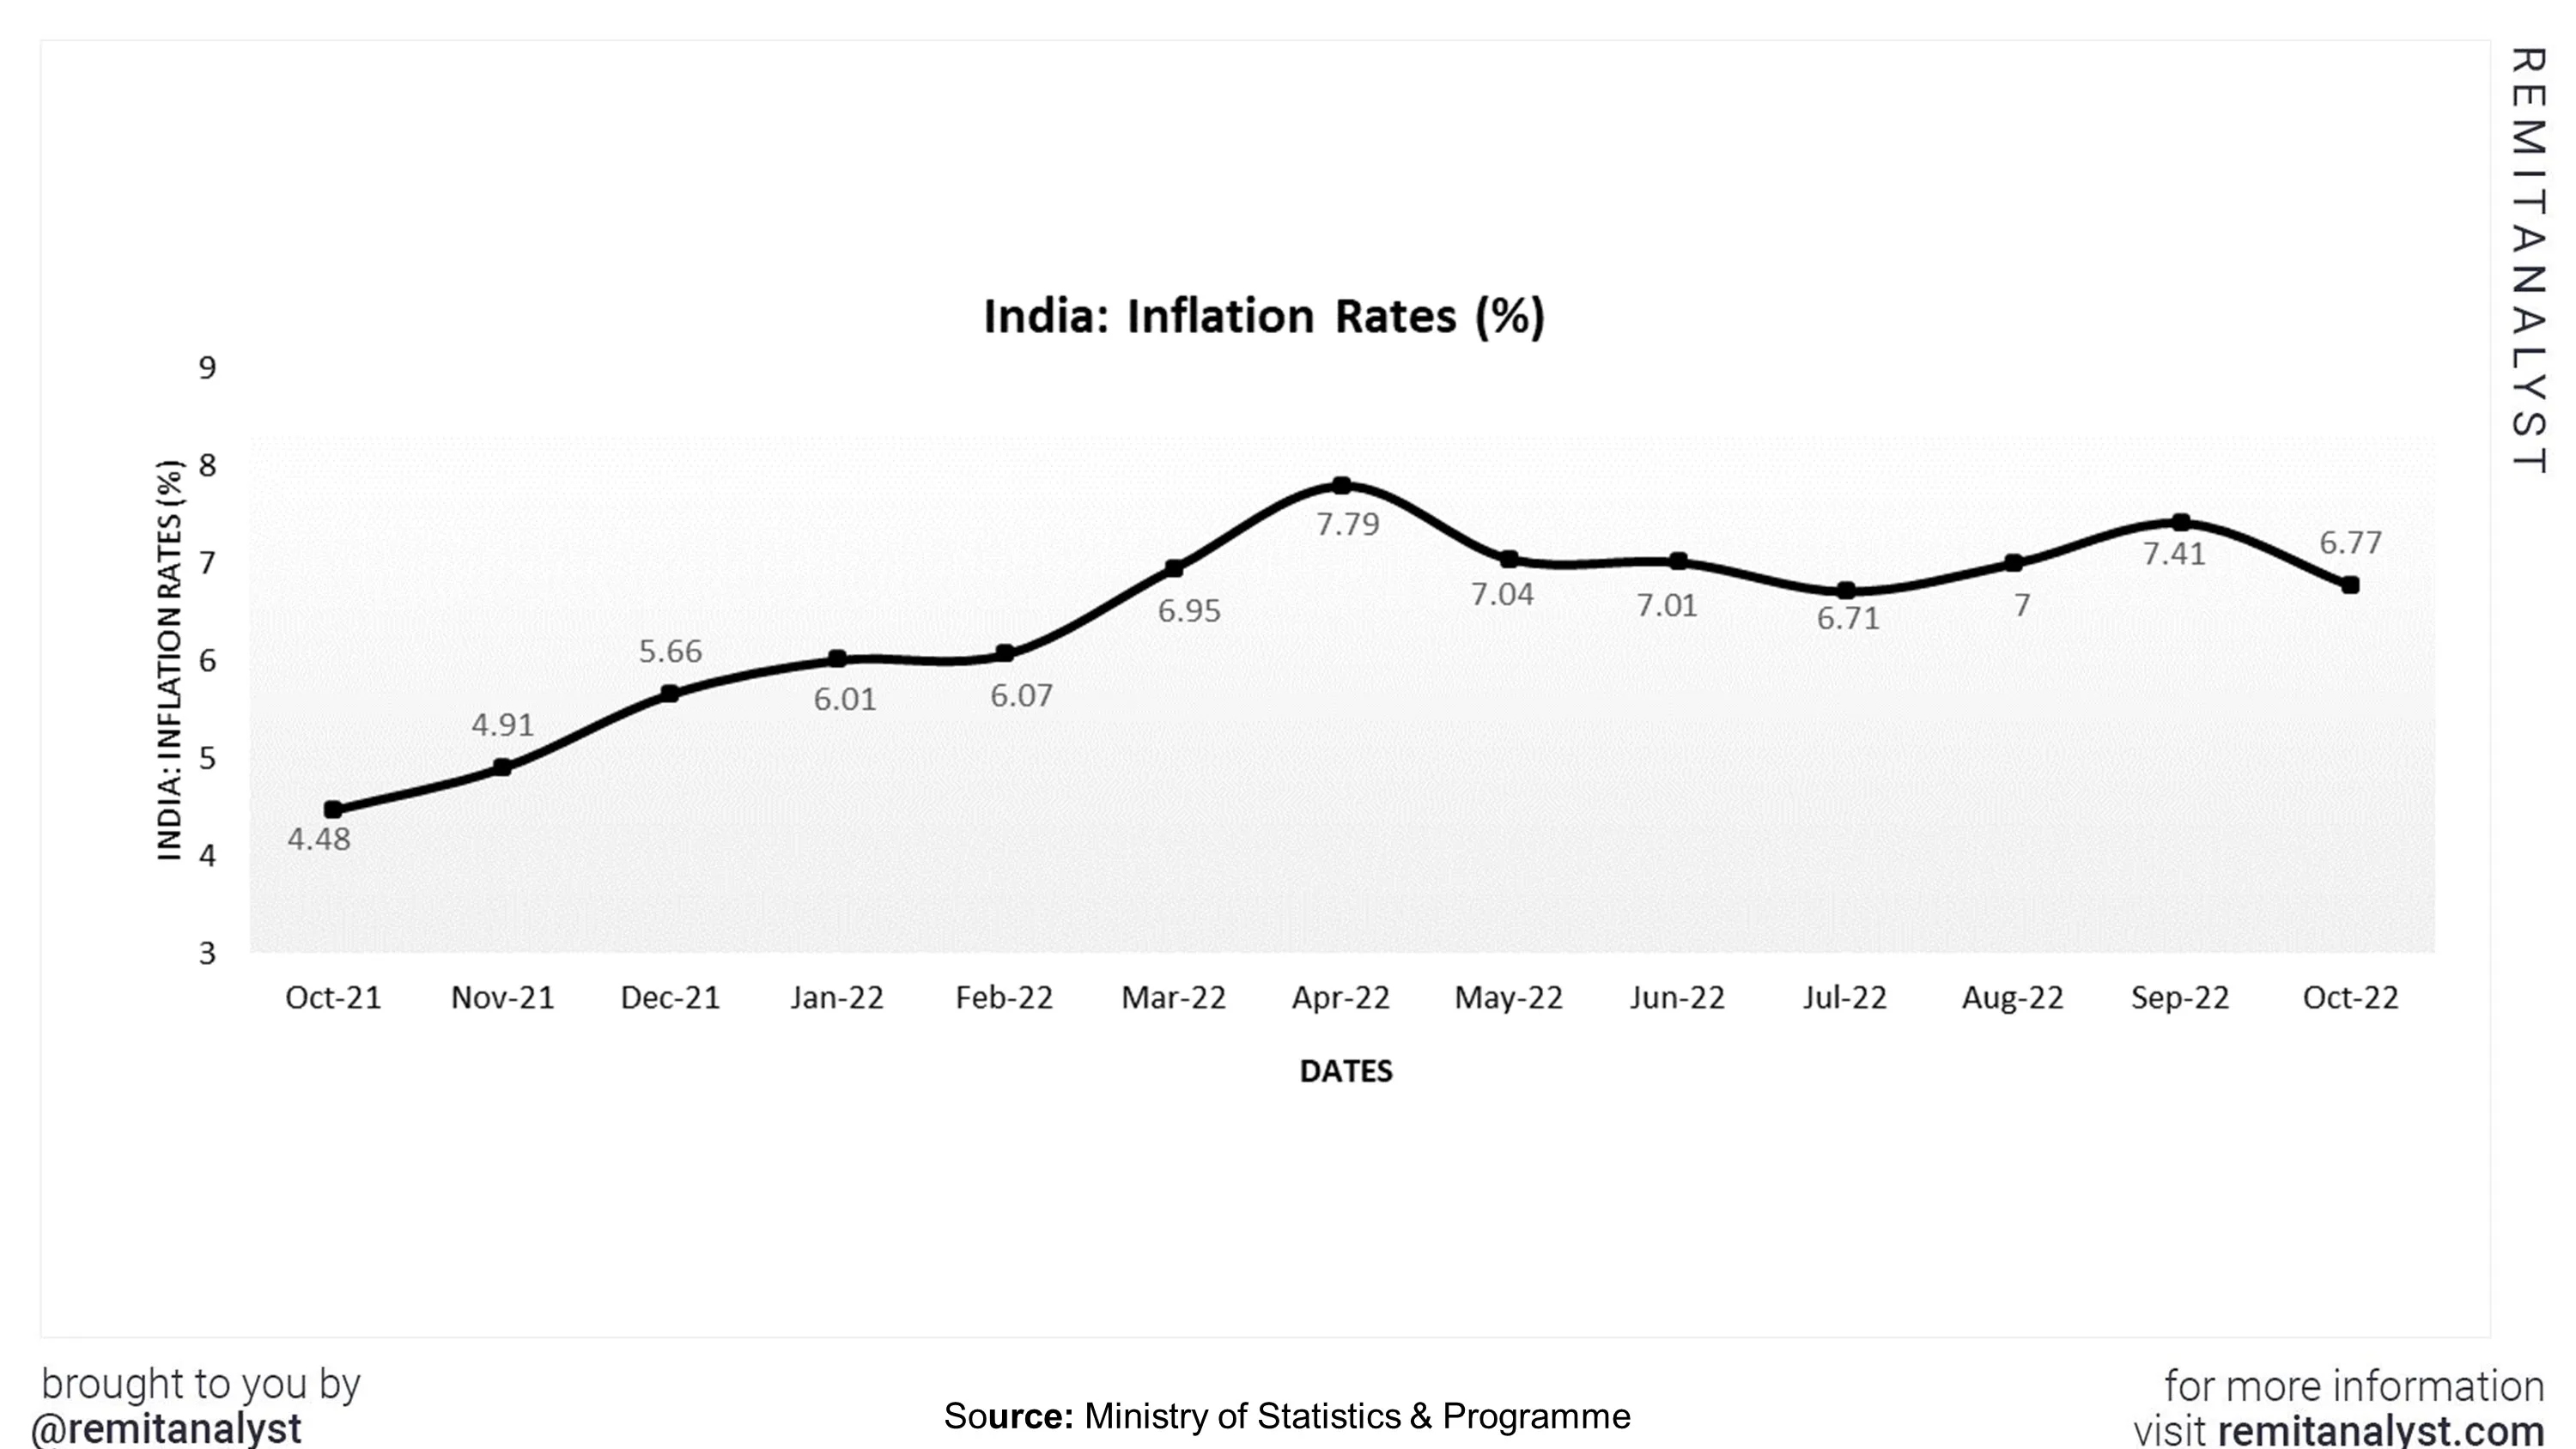 inflation-rates-india-from-oct-2021-to-oct-2022